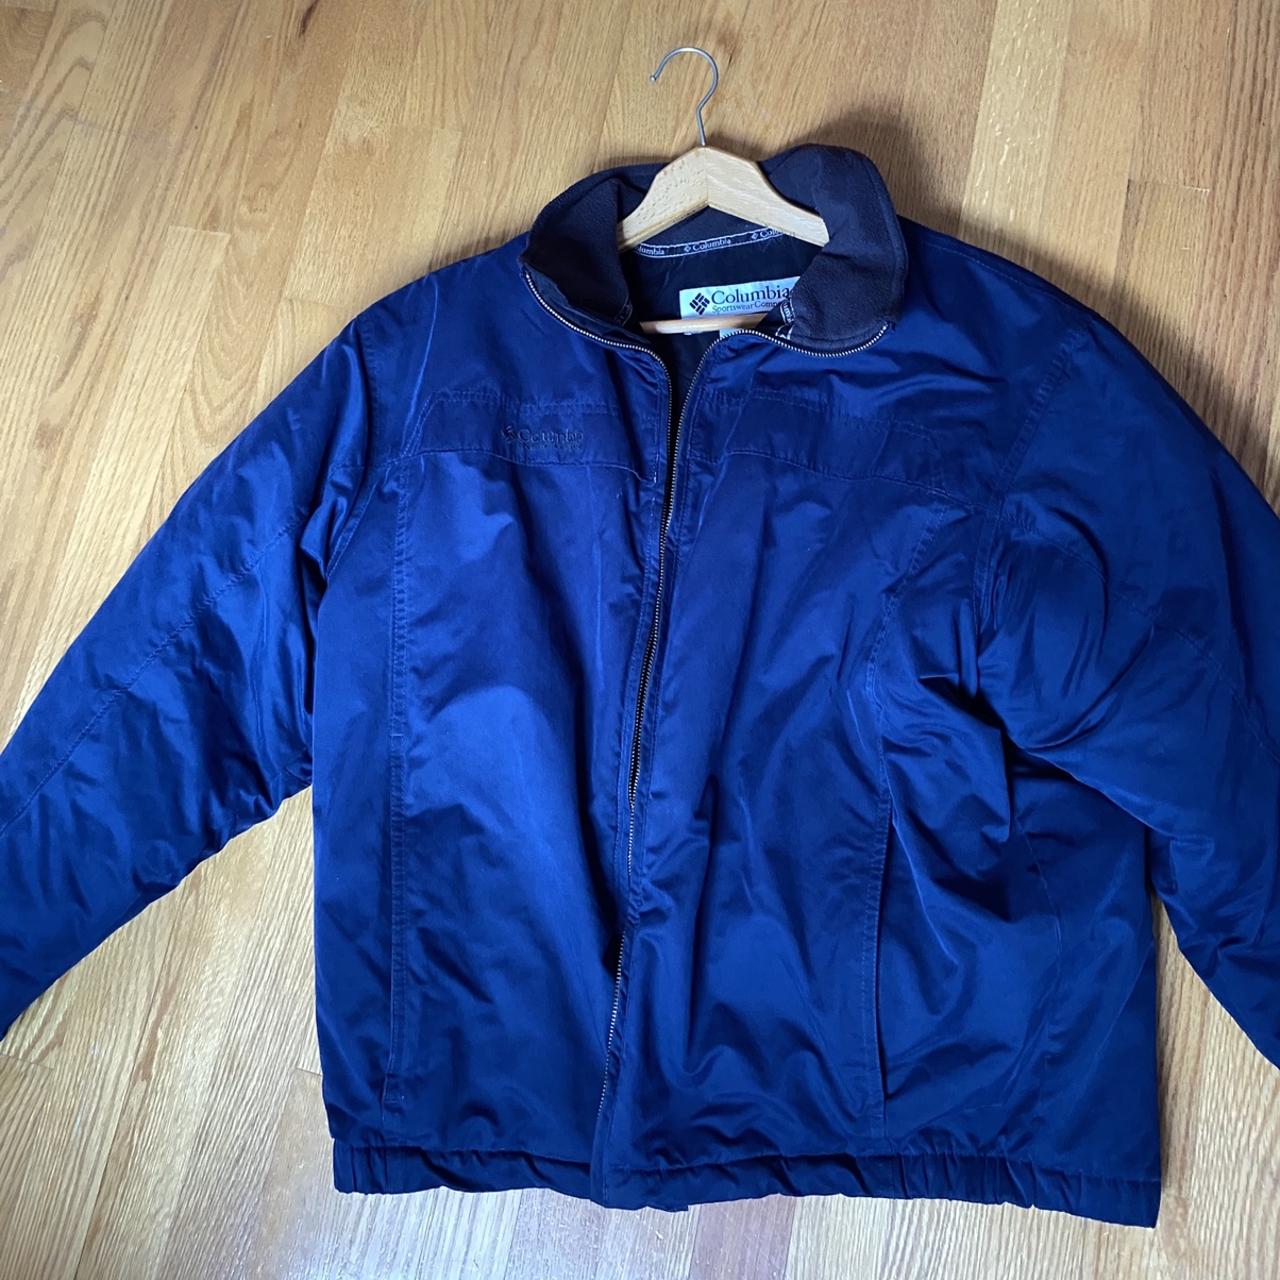 Vintage Columbia Puffer Jacket Really good quality... - Depop